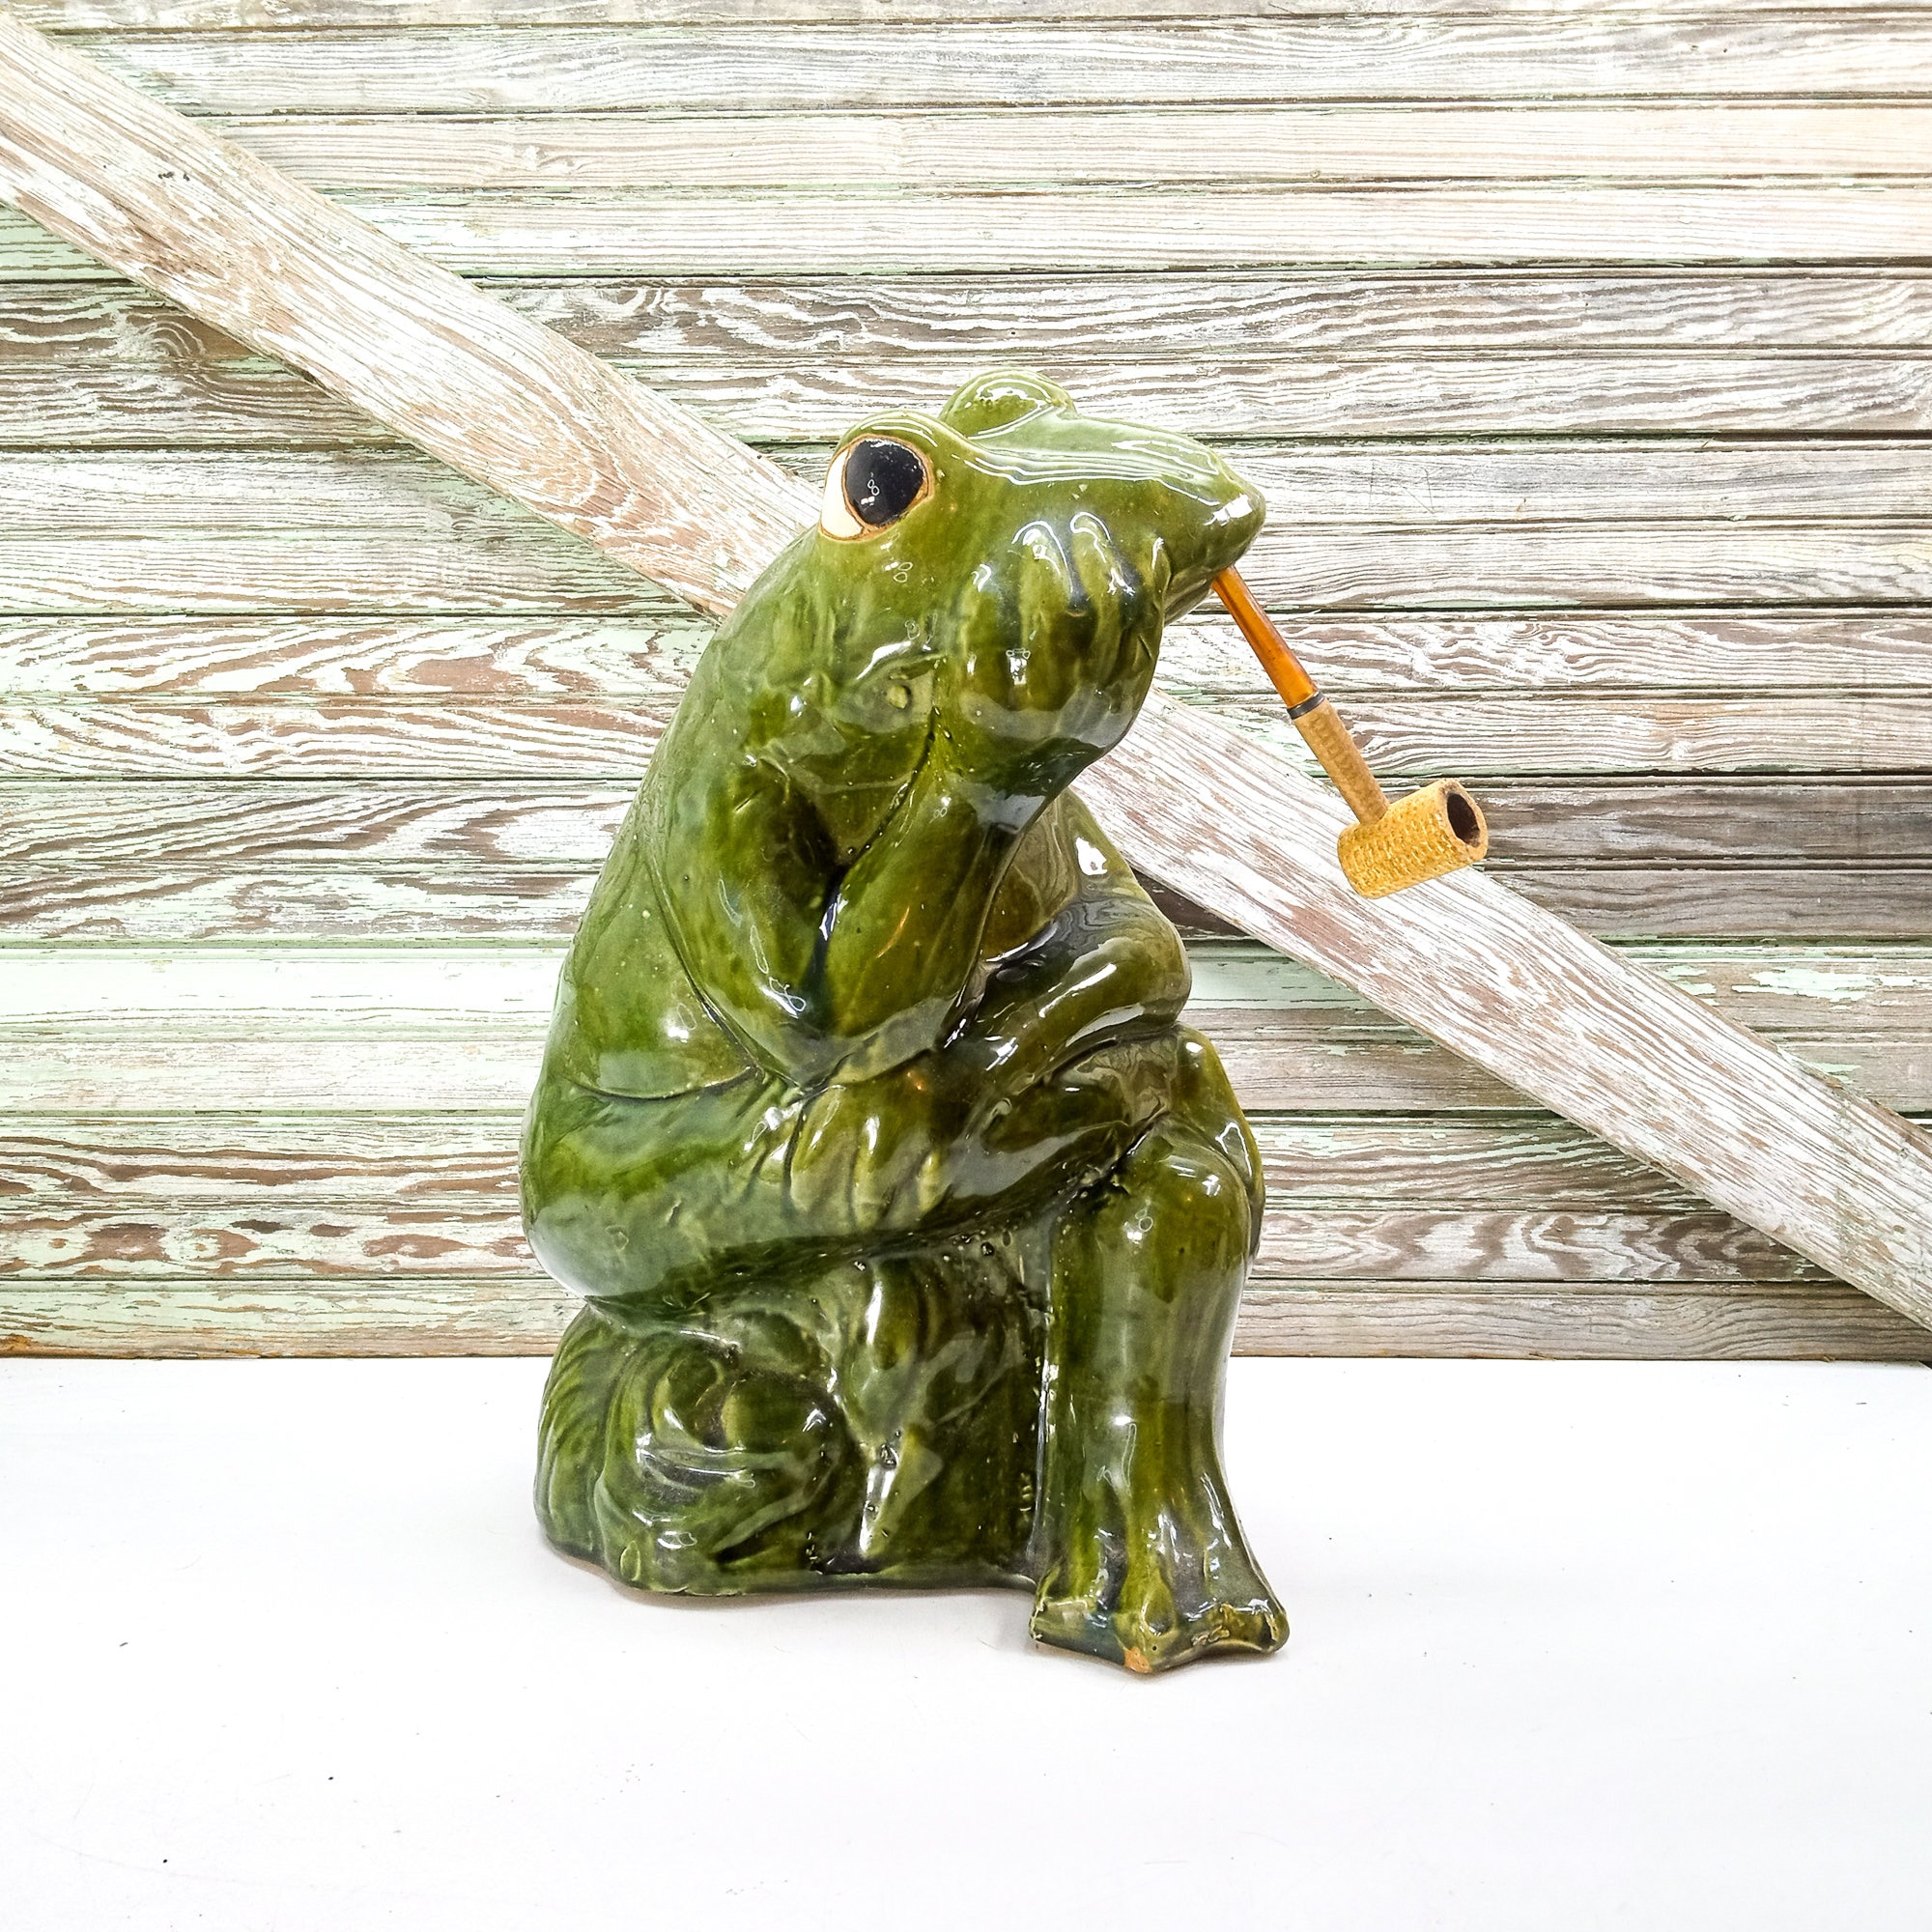 Large Vintage Ceramic Frog Statue Smoking a Corn Cob Pipe Retro Home Decor  Shabby Chic Decorative Collectible Rustic Frog Toad Thinking Man -   Sweden